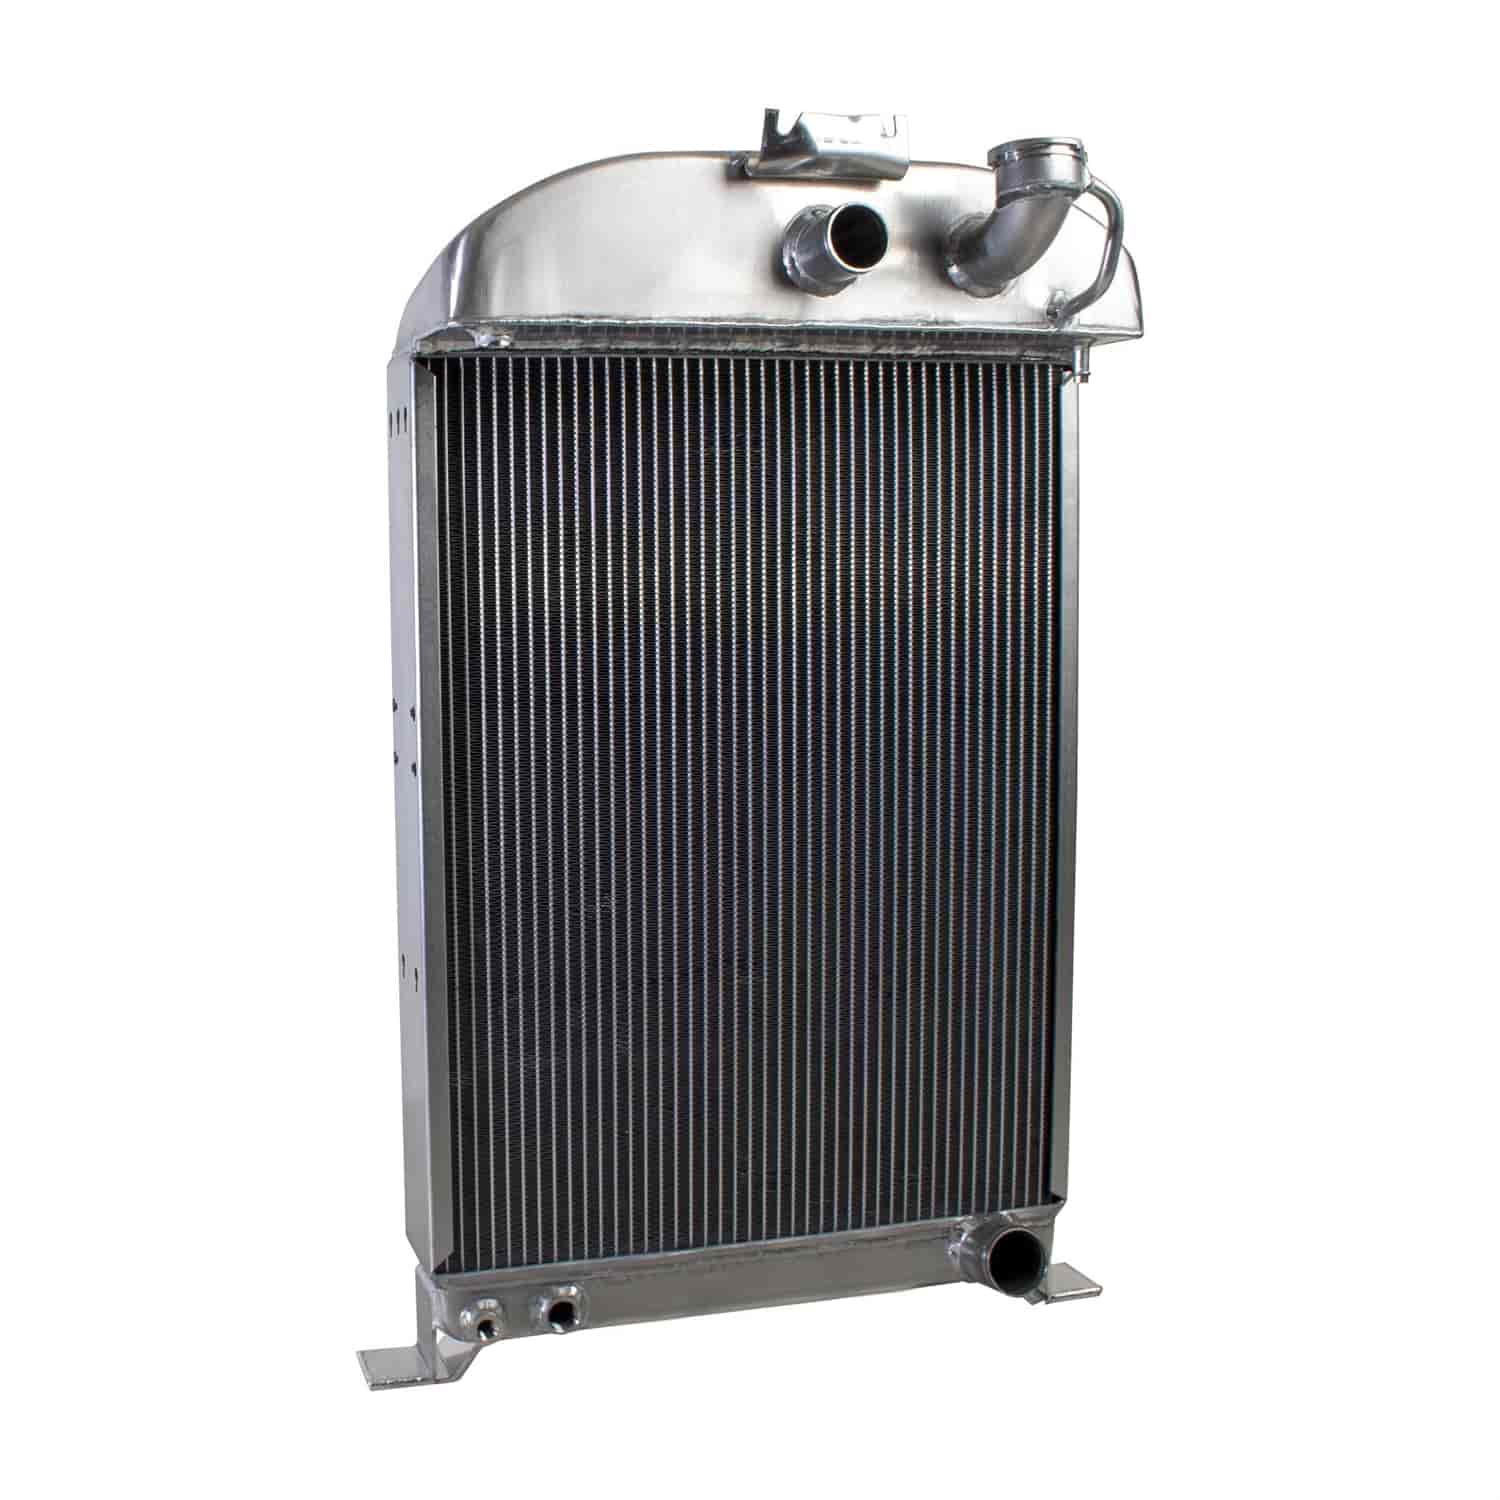 ExactFit Radiator for 1933-1934 Ford with Early GM Engine